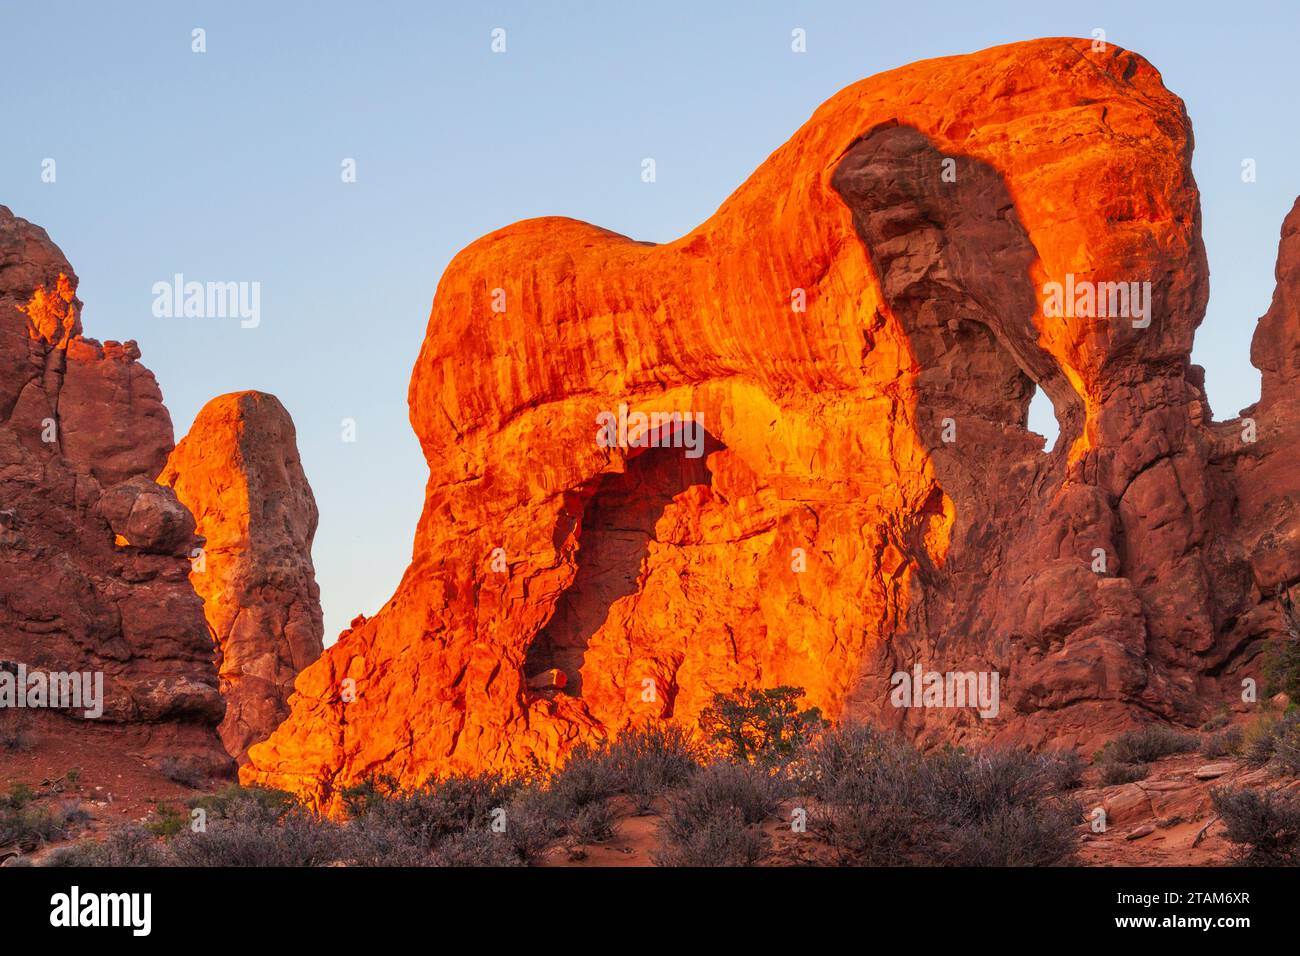 Parade of Elephants sandstone rock formations at sunrise in Arches National Park in Utah. Stock Photo